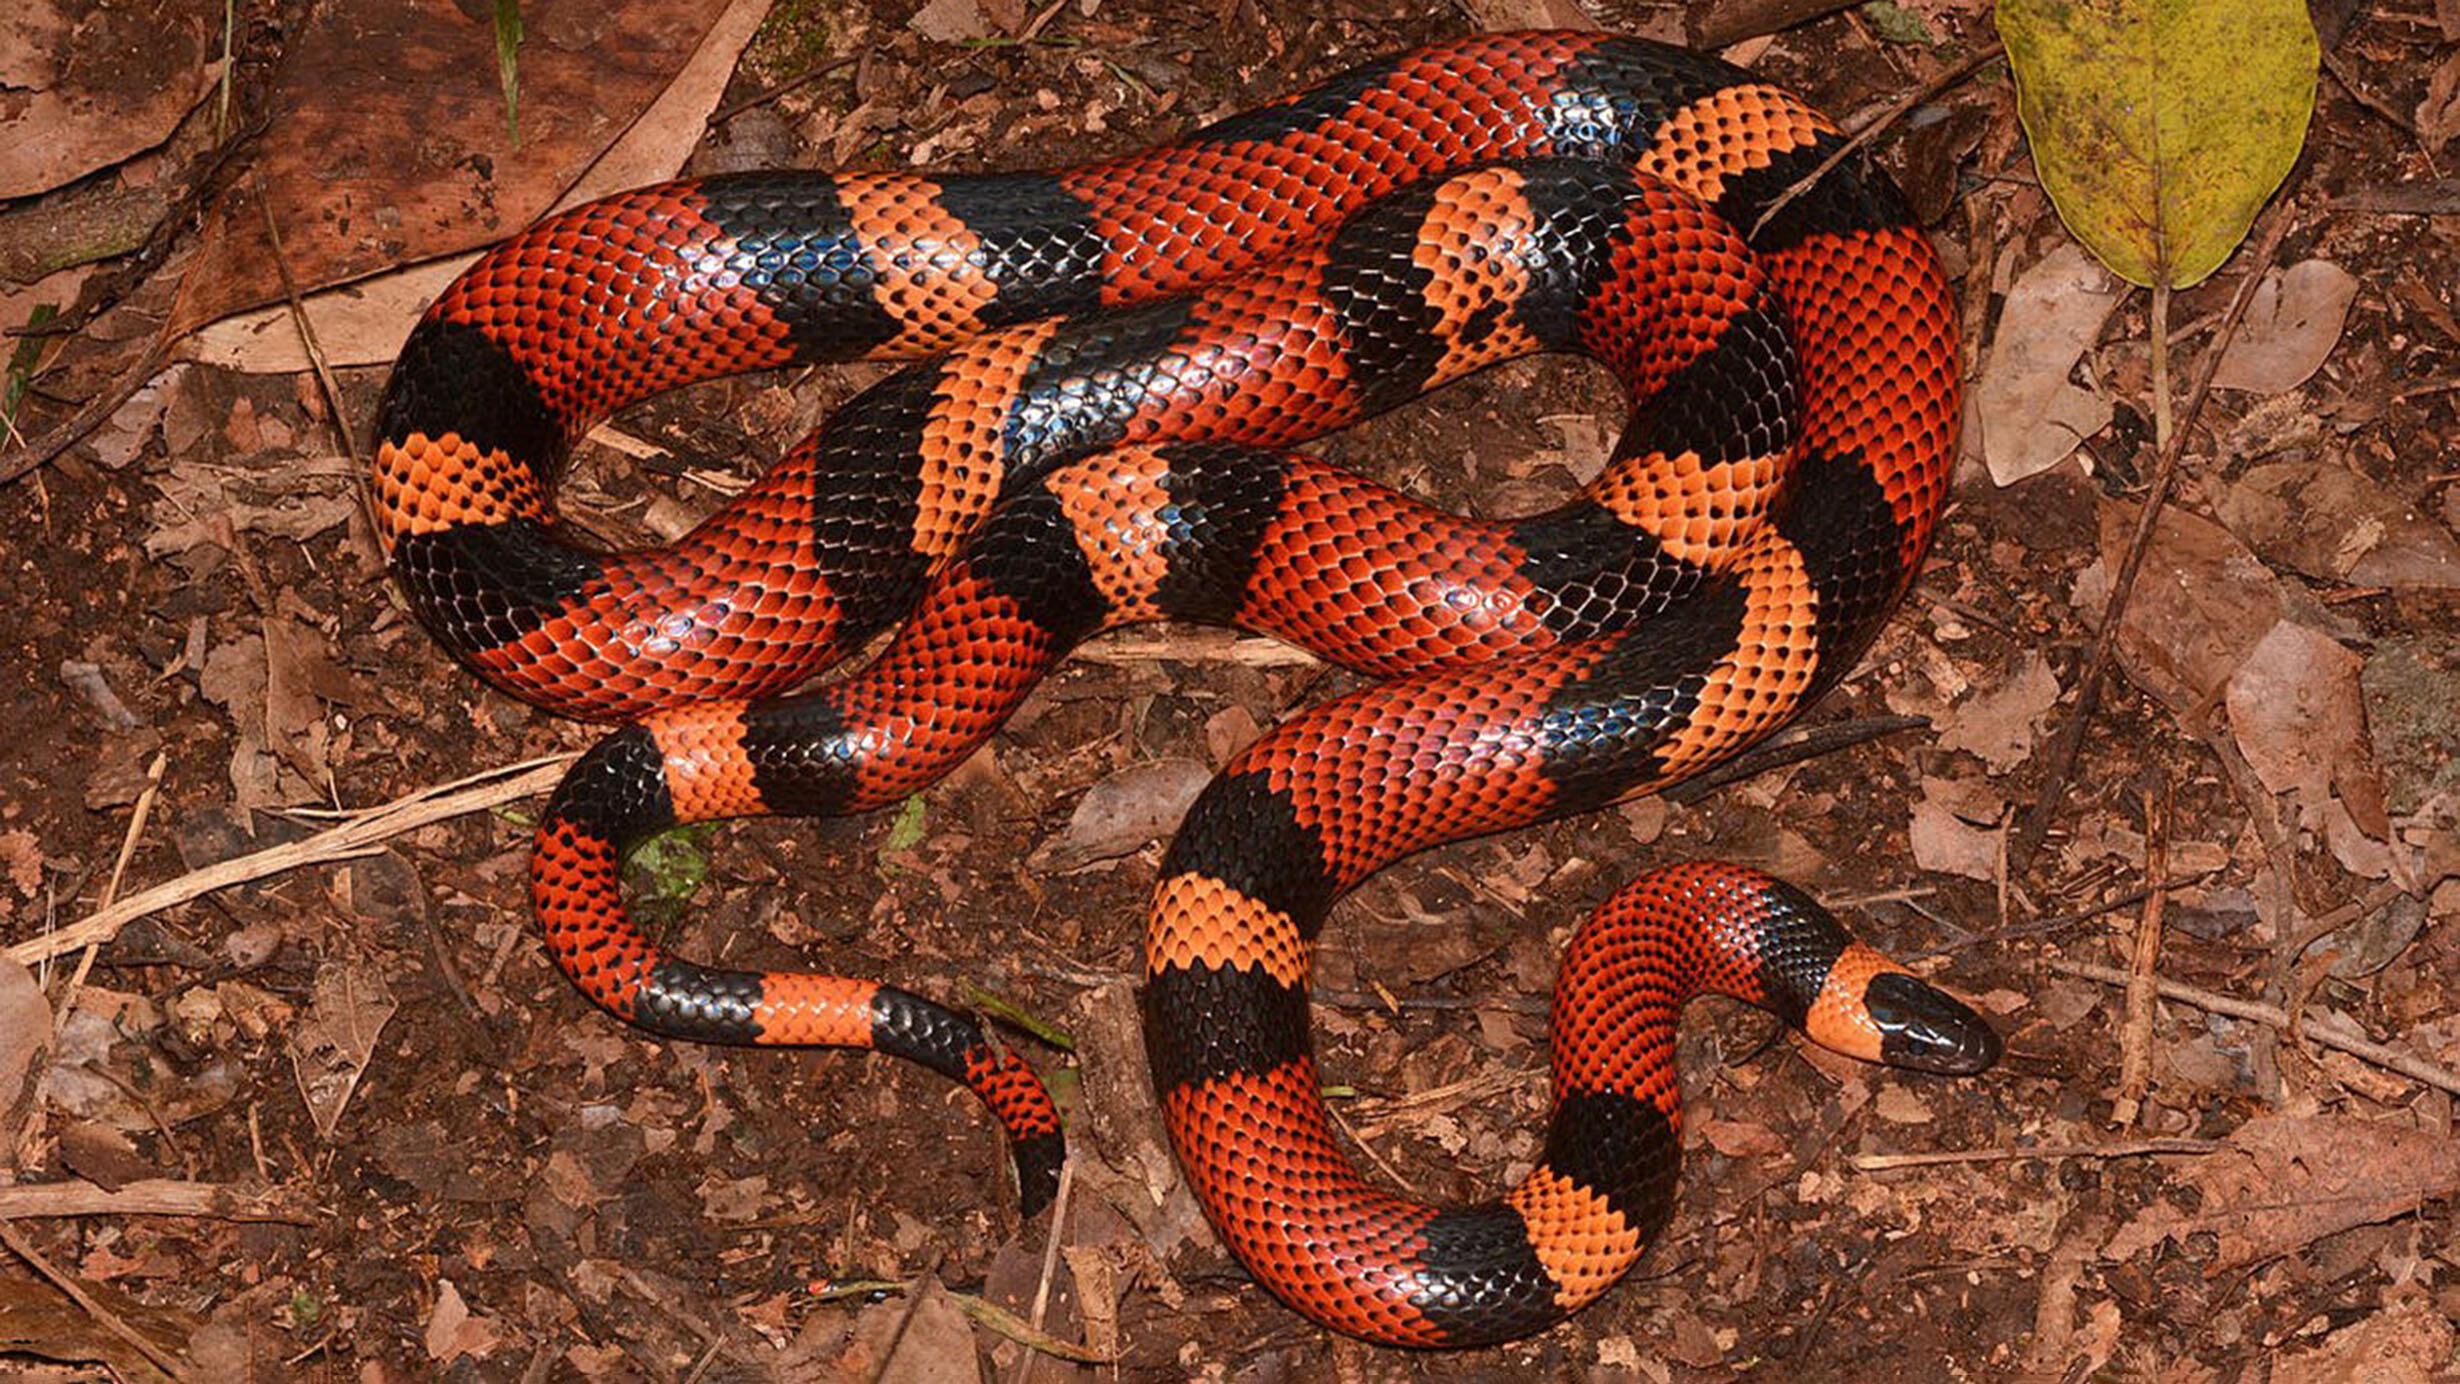 Colorful, striped milksnake on the ground.